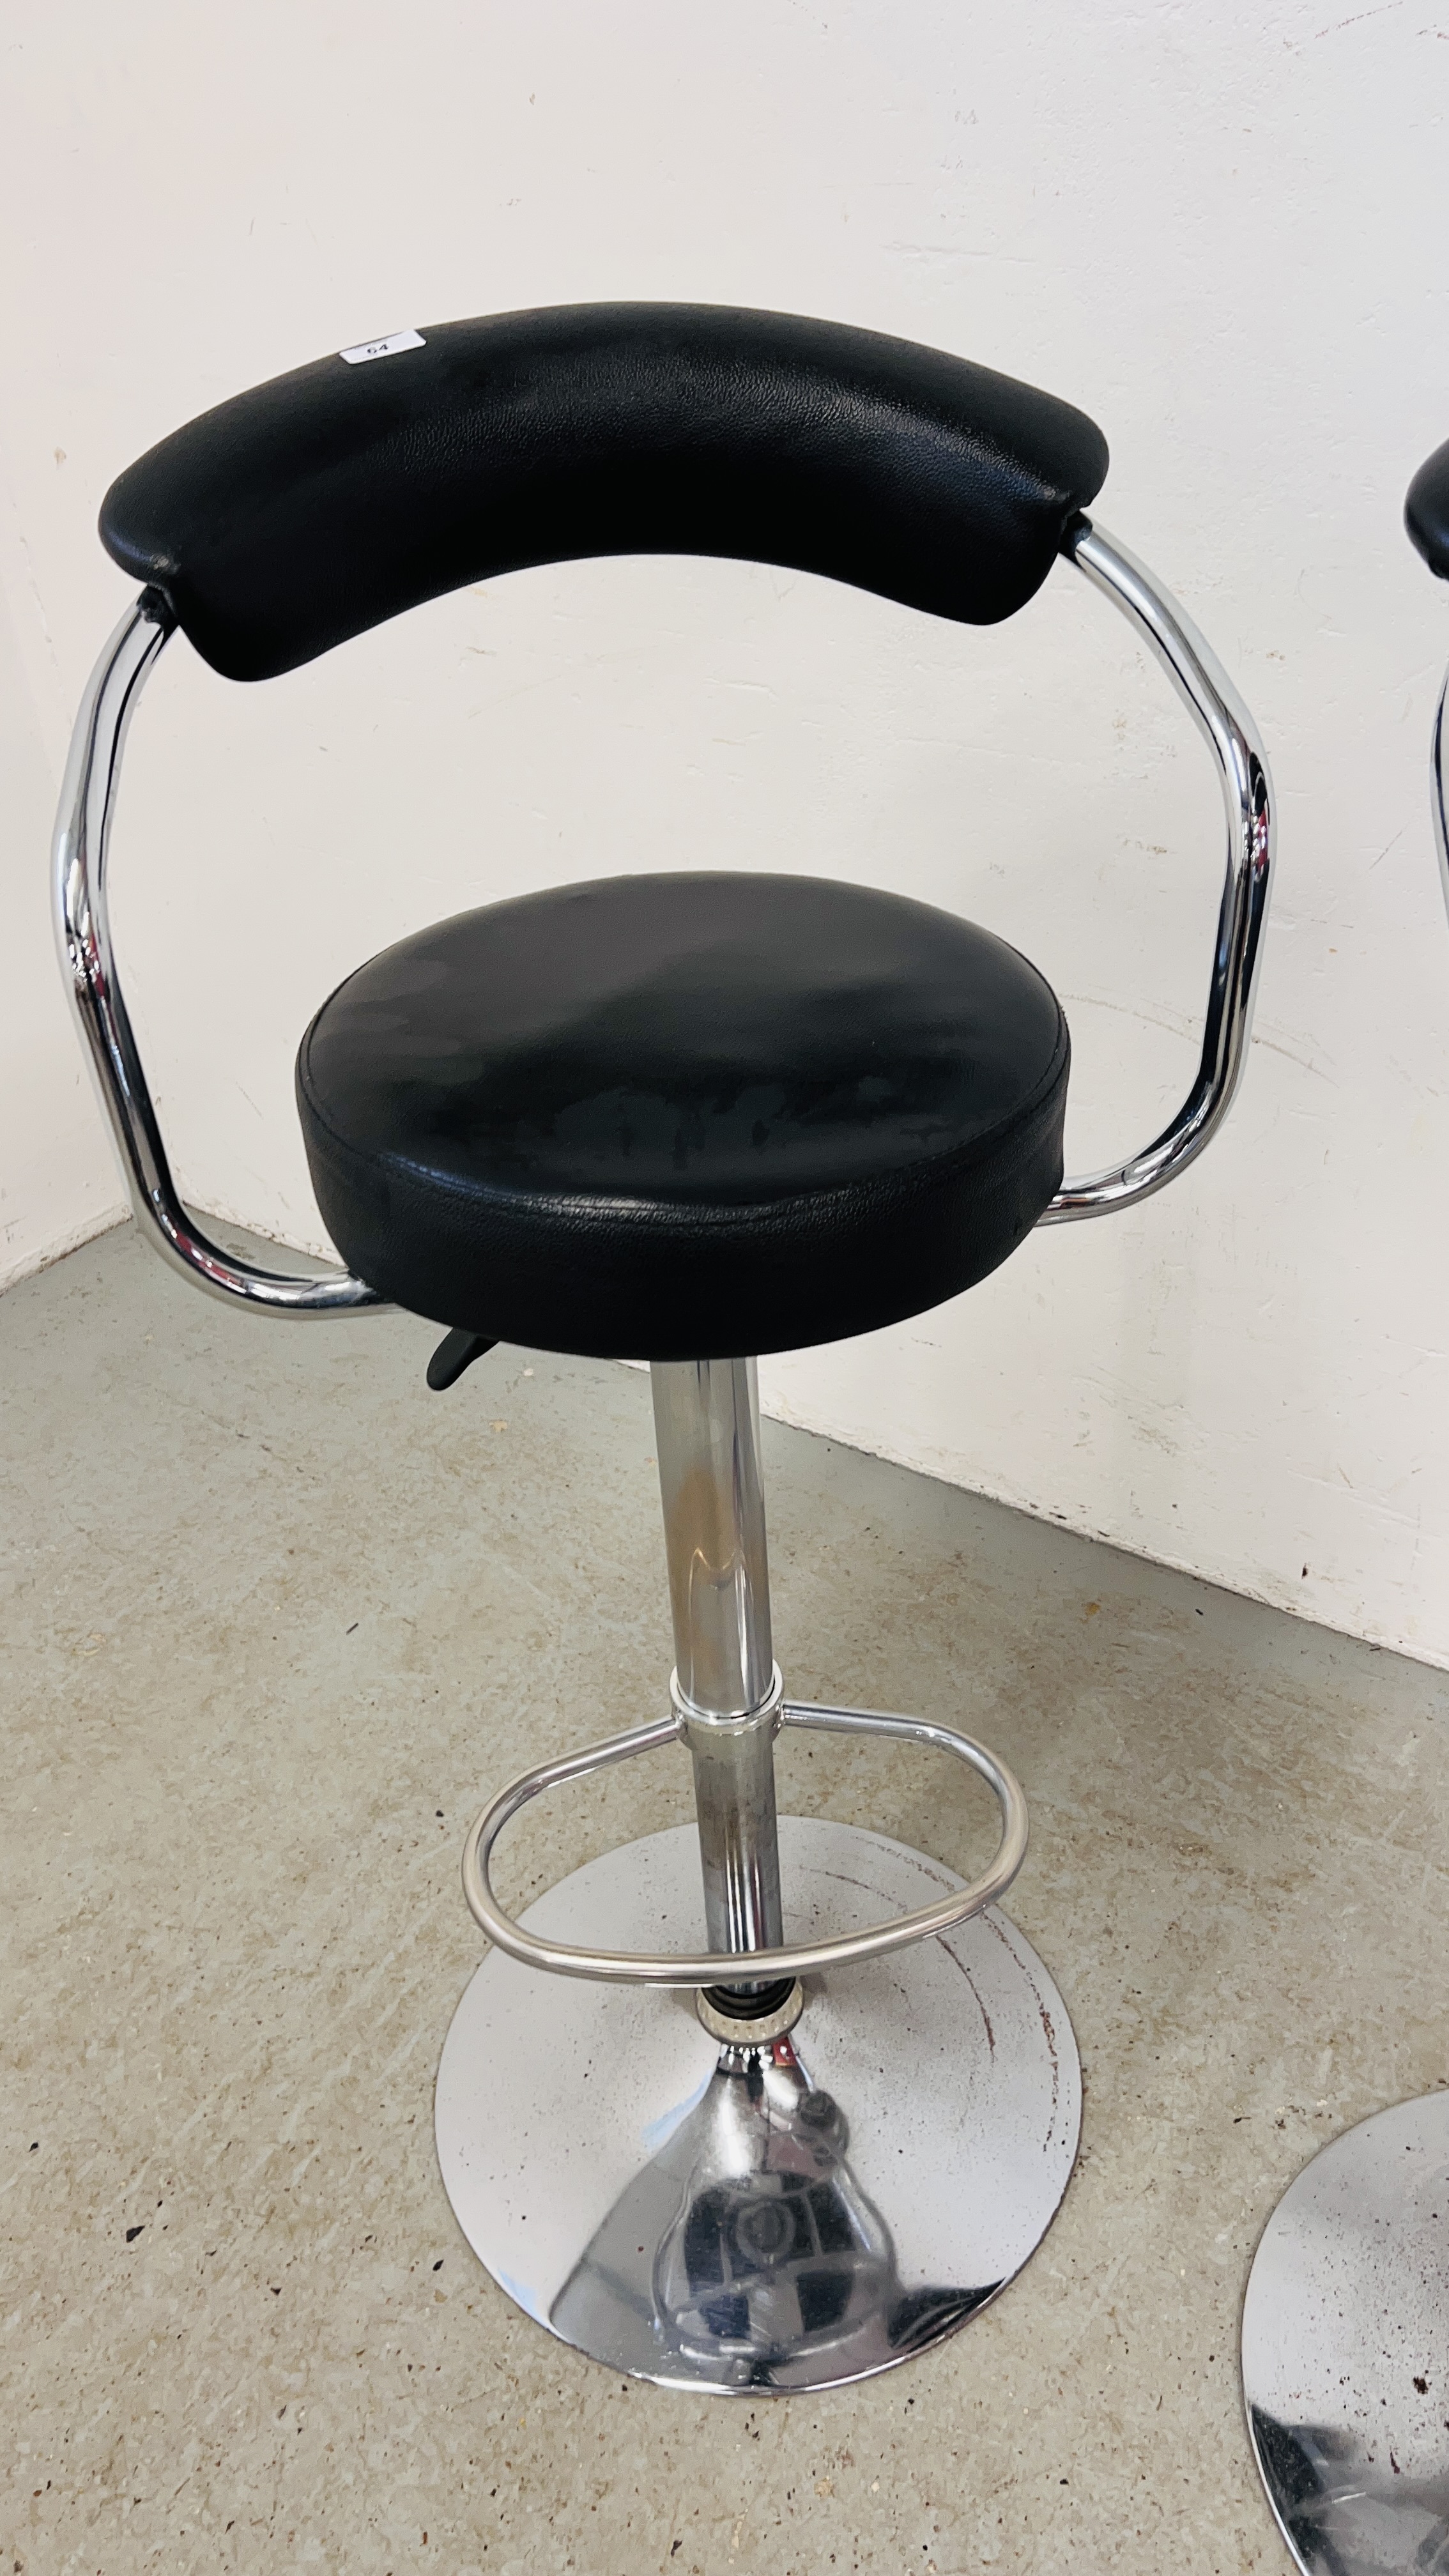 A PAIR OF CHROME FINISH RISE AND FALL BAR STOOLS - Image 3 of 9